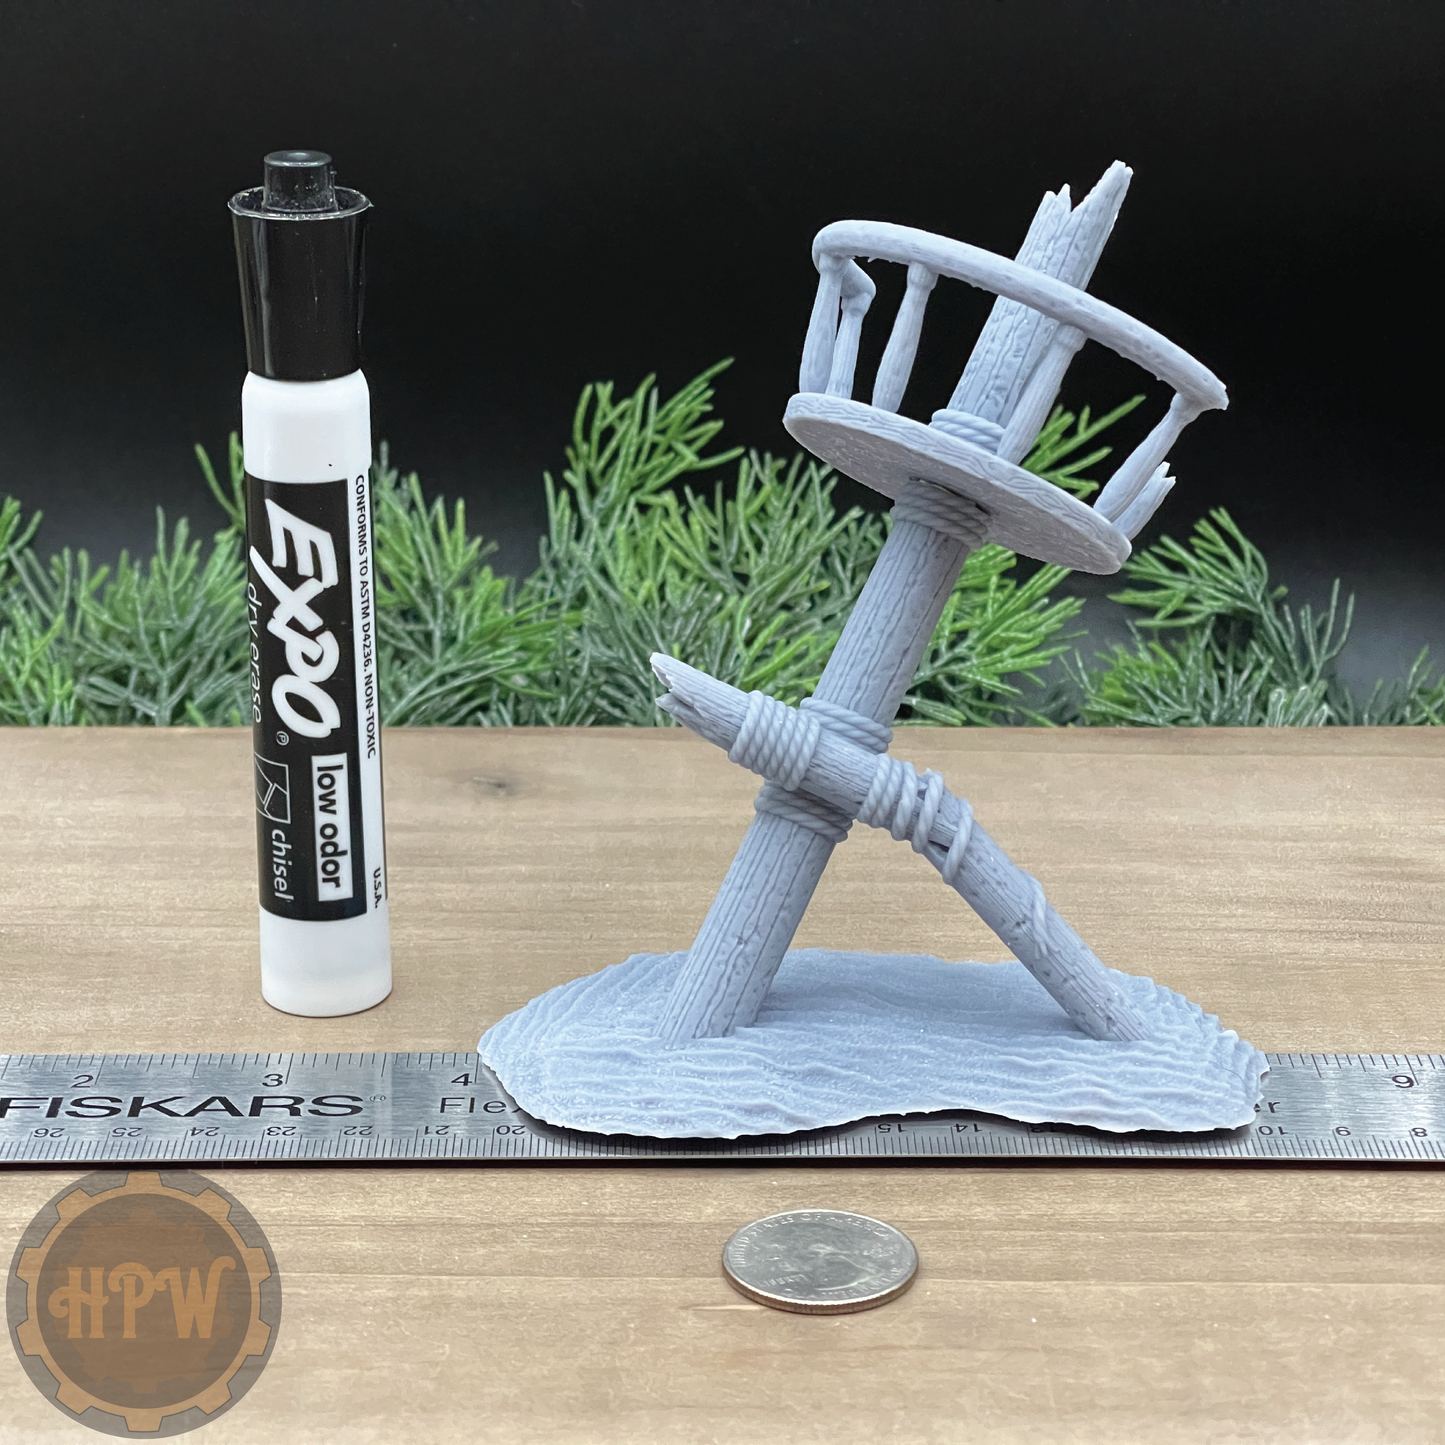 Crow's Nest Wreckage | Shattered Mast | Miniature Gaming Terrain Kit | GameScape3D | Sea Stack Cove